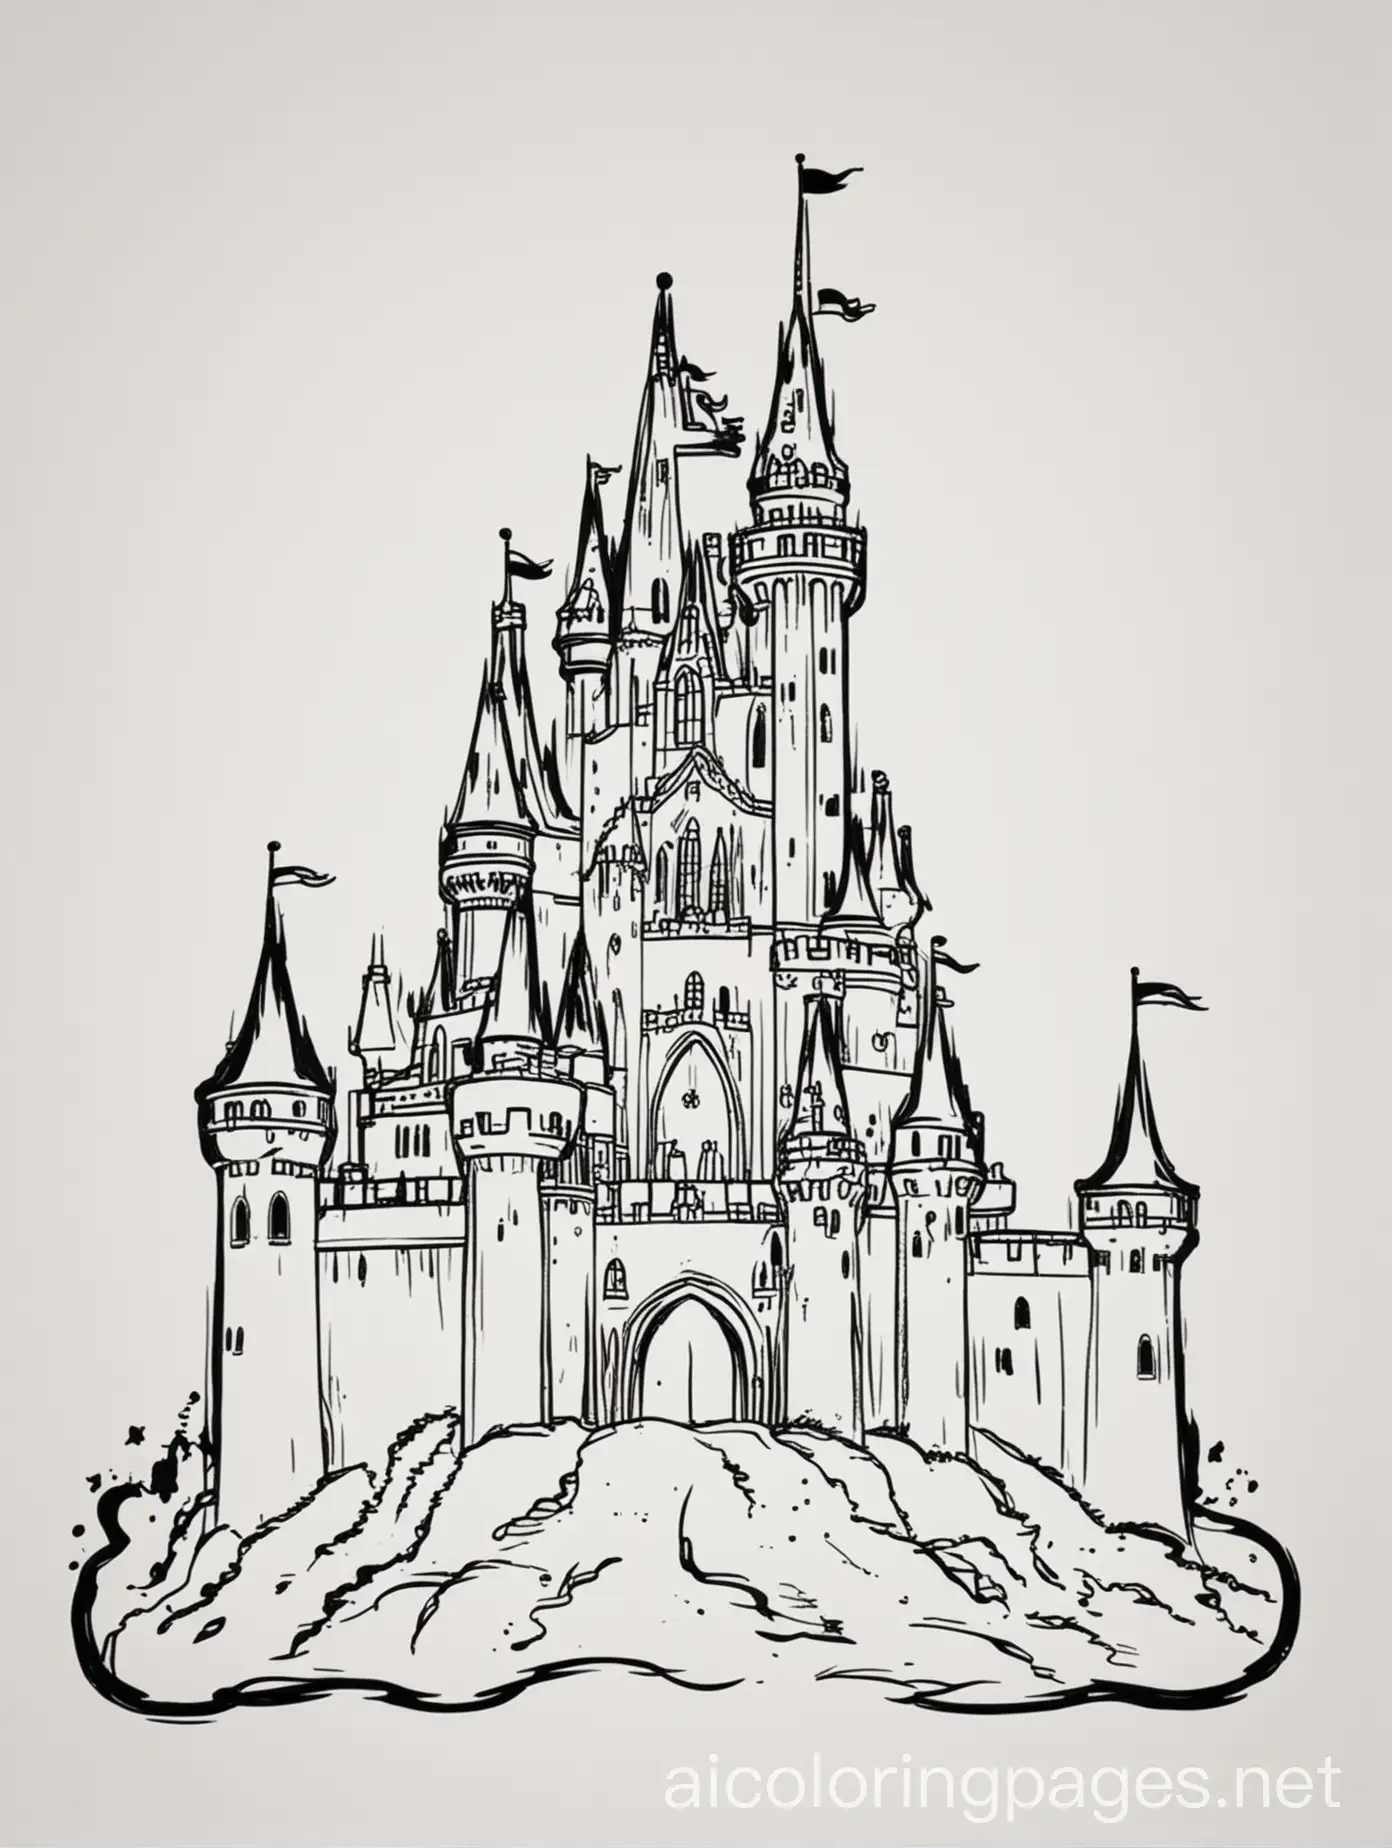 disney castle snow white outline simple, Coloring Page, black and white, line art, white background, Simplicity, Ample White Space. The background of the coloring page is plain white to make it easy for young children to color within the lines. The outlines of all the subjects are easy to distinguish, making it simple for kids to color without too much difficulty